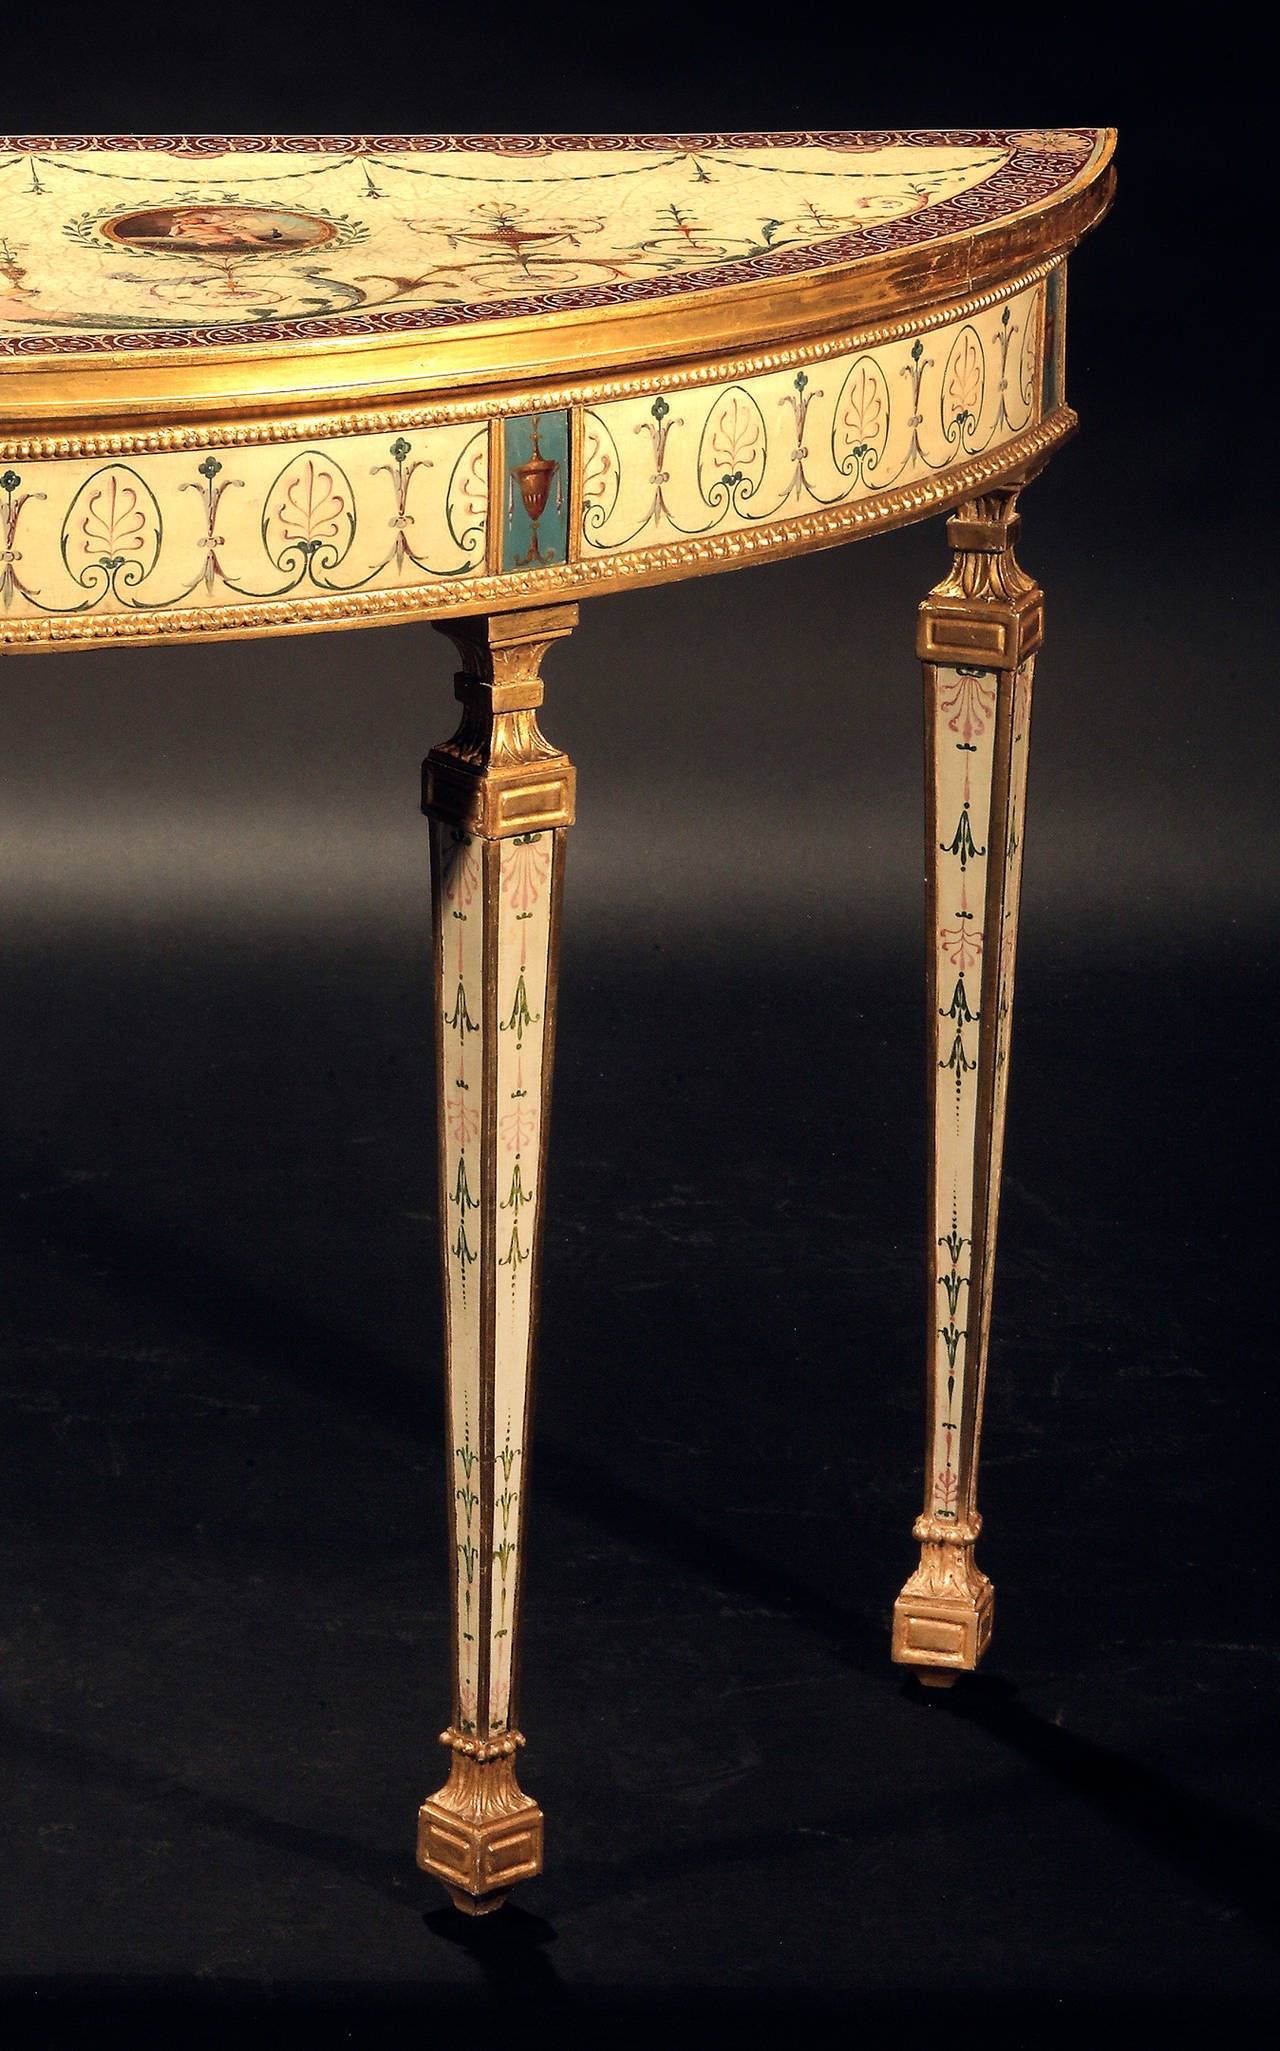 In the manner of Robert Adam, having painted decoration attributed to Pergolesi and Cipriani.
The semi-elliptical top with molded edge, gold and claret colored anthemion border centering medallions most likely painted by Michael Angelo Pergolesi,